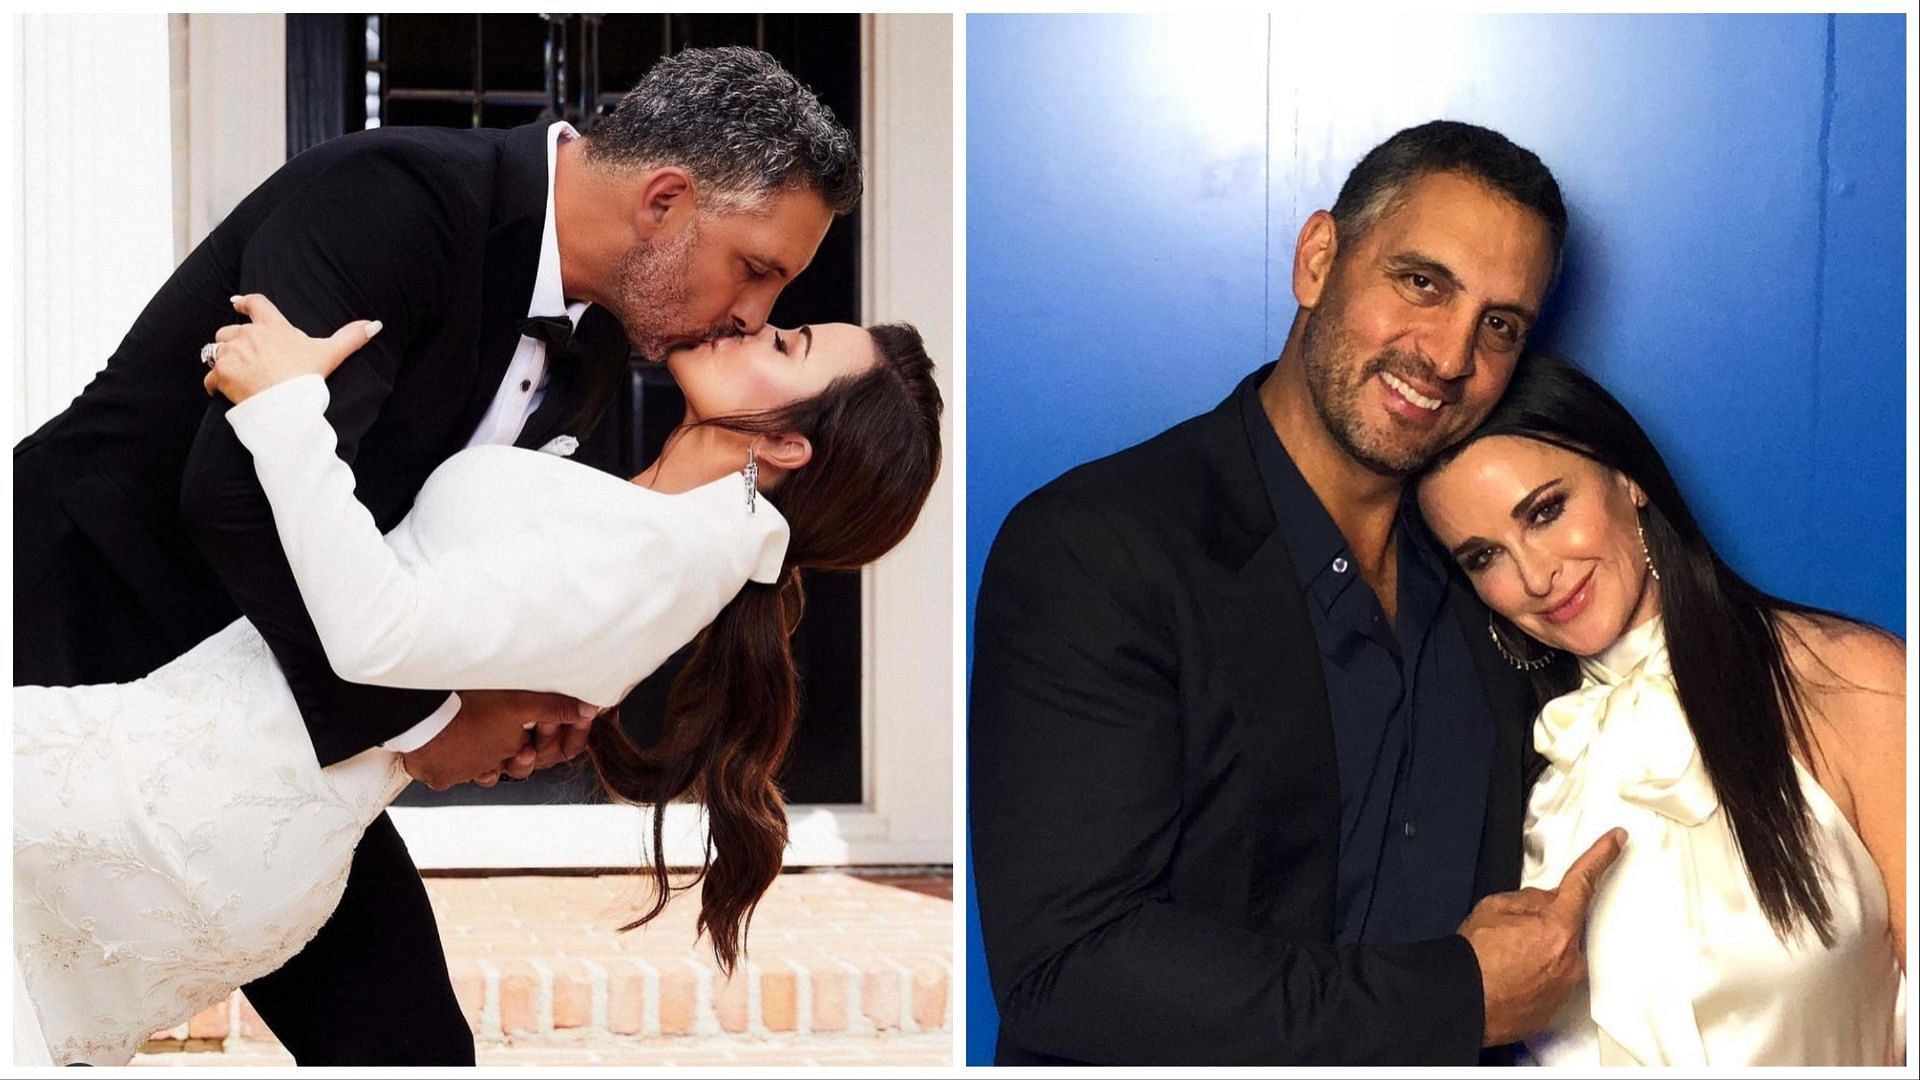 Kyle Richards and Mauricio Umansky announced their split after almost three decades of being together (Image via Instagram / @mumansky18)